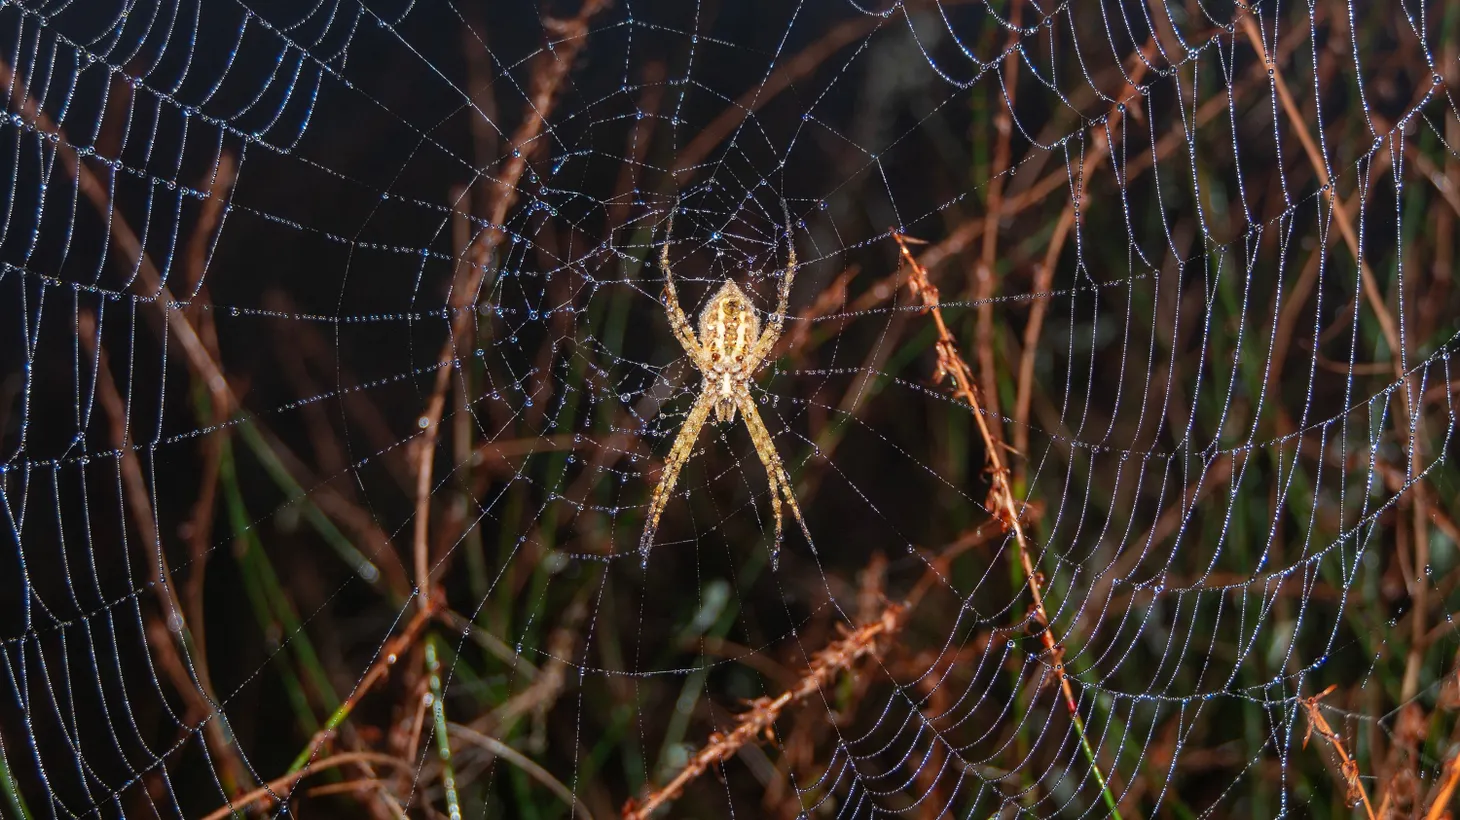 LA is in peak spider season, and Nature Nexus Institute wants you to know that’s a good thing.